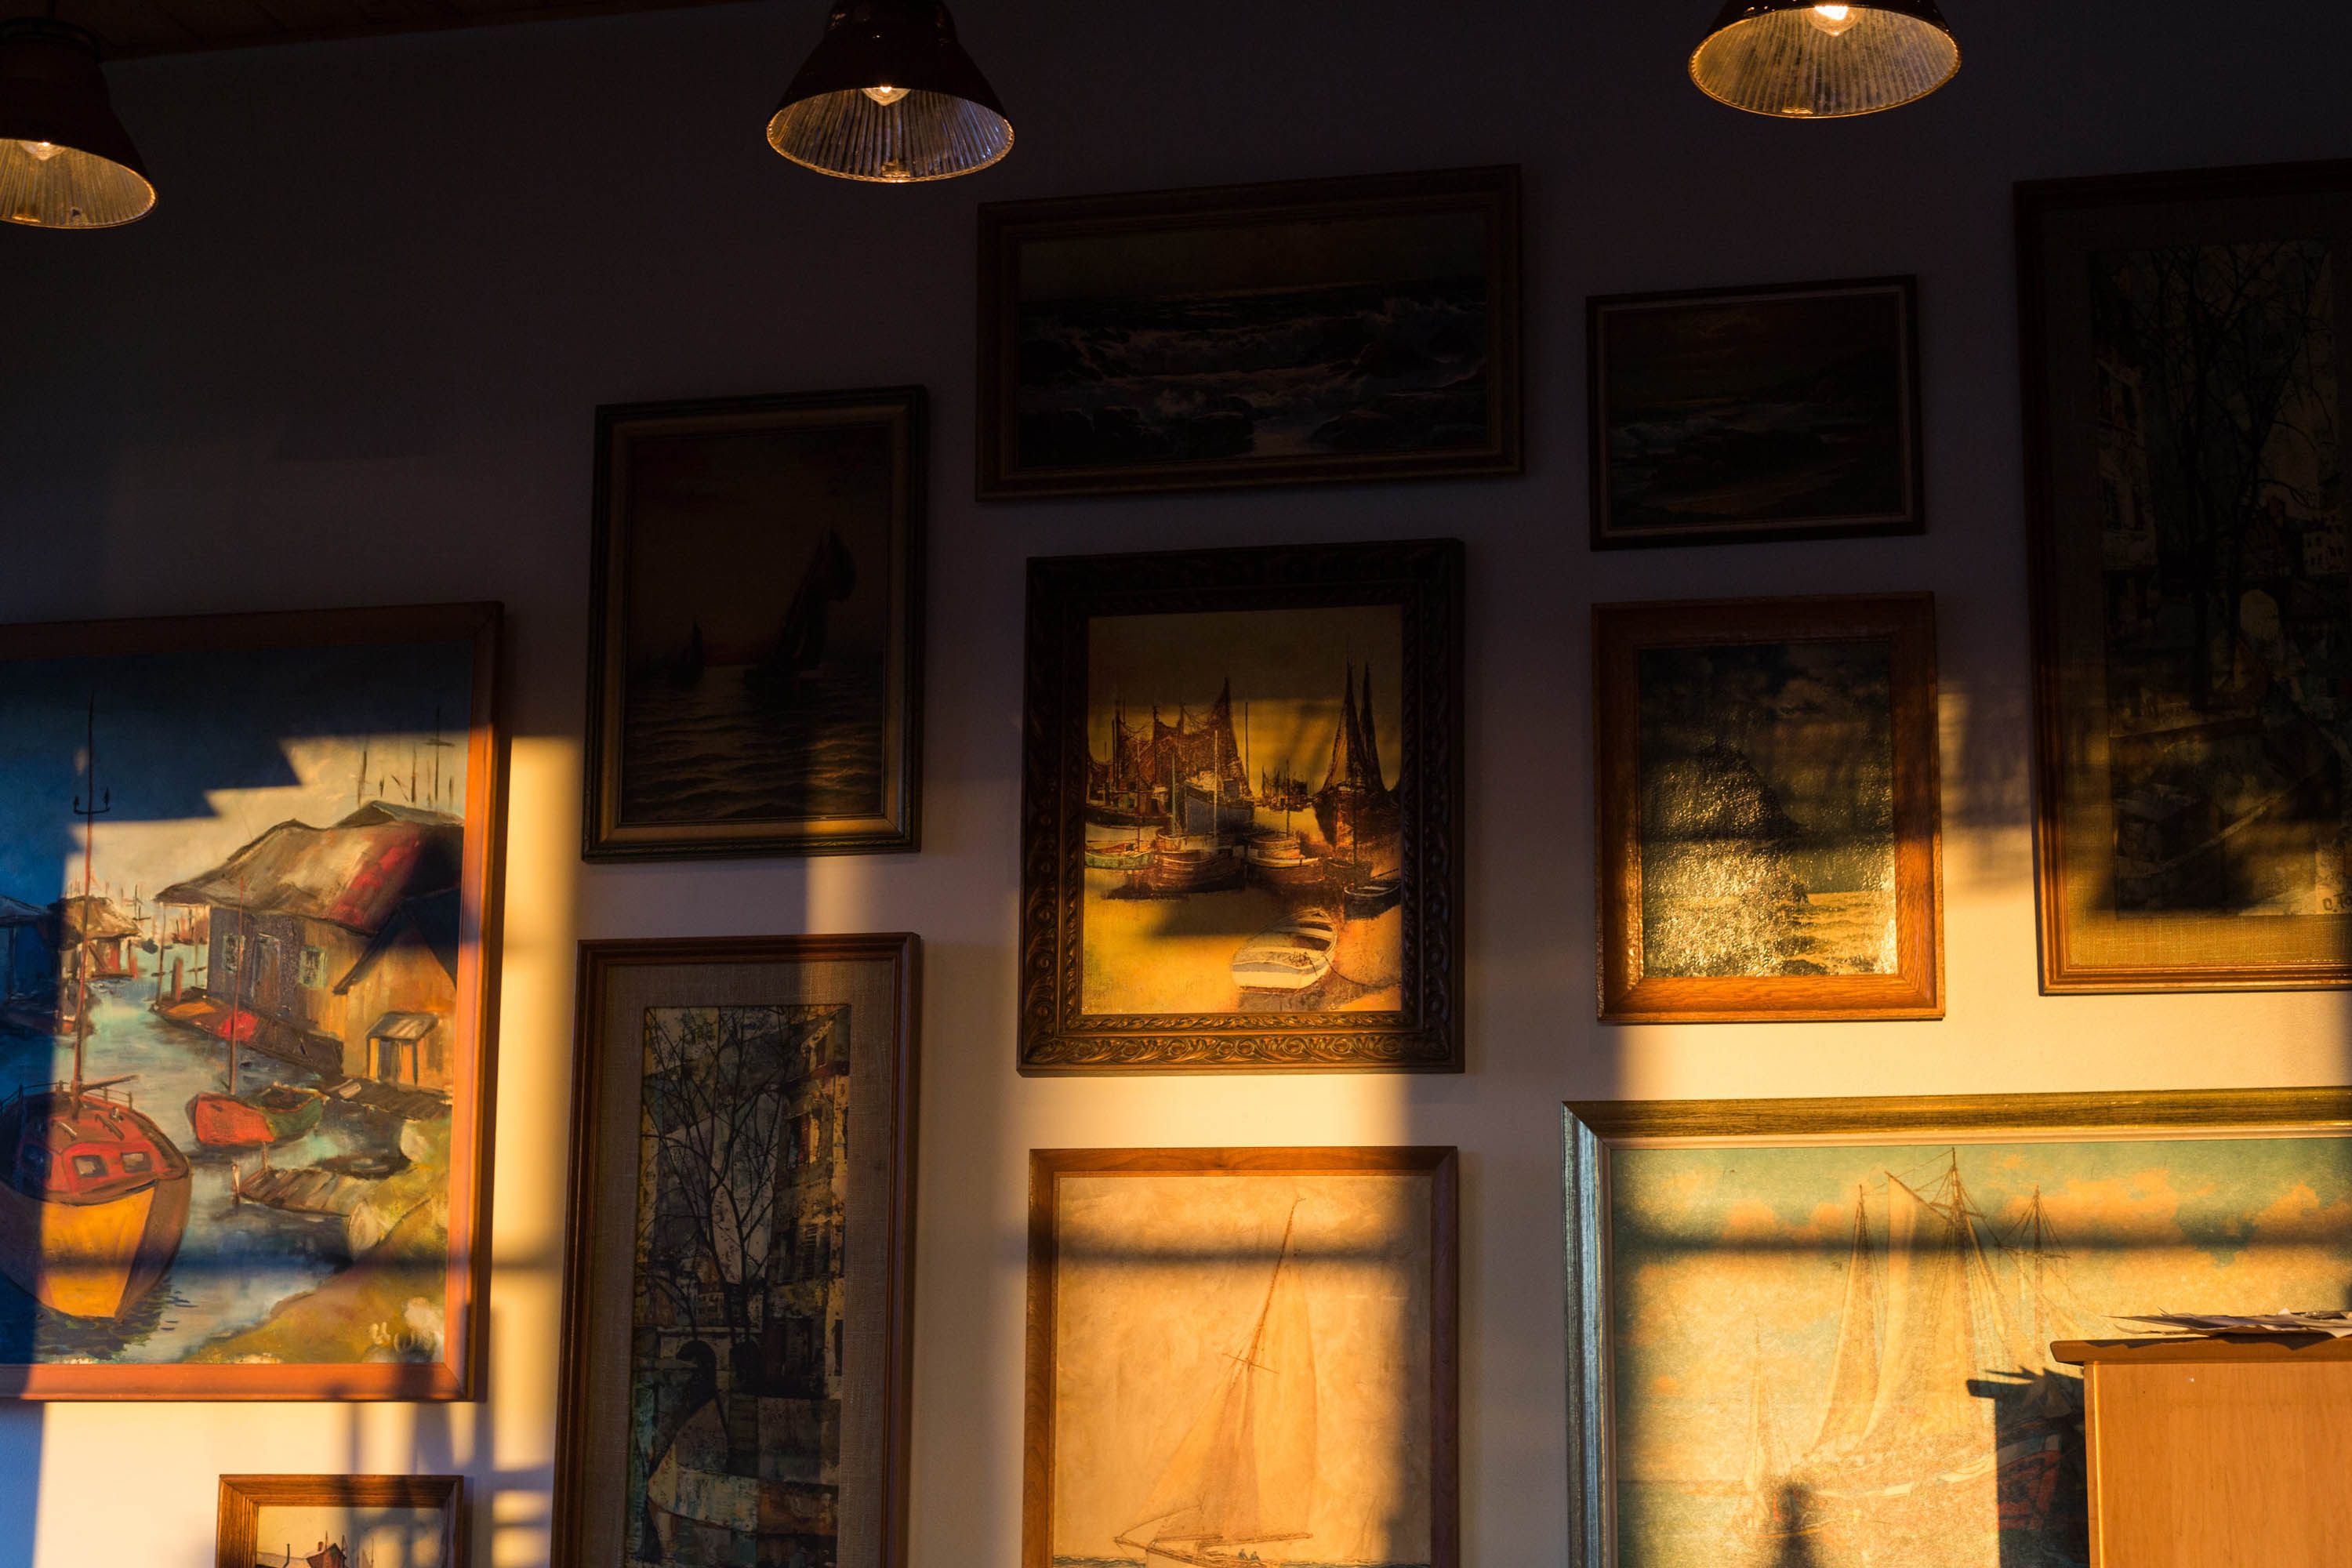 The gallery wall is illuminated by the golden hour light, enhancing the appeal of the paintings.